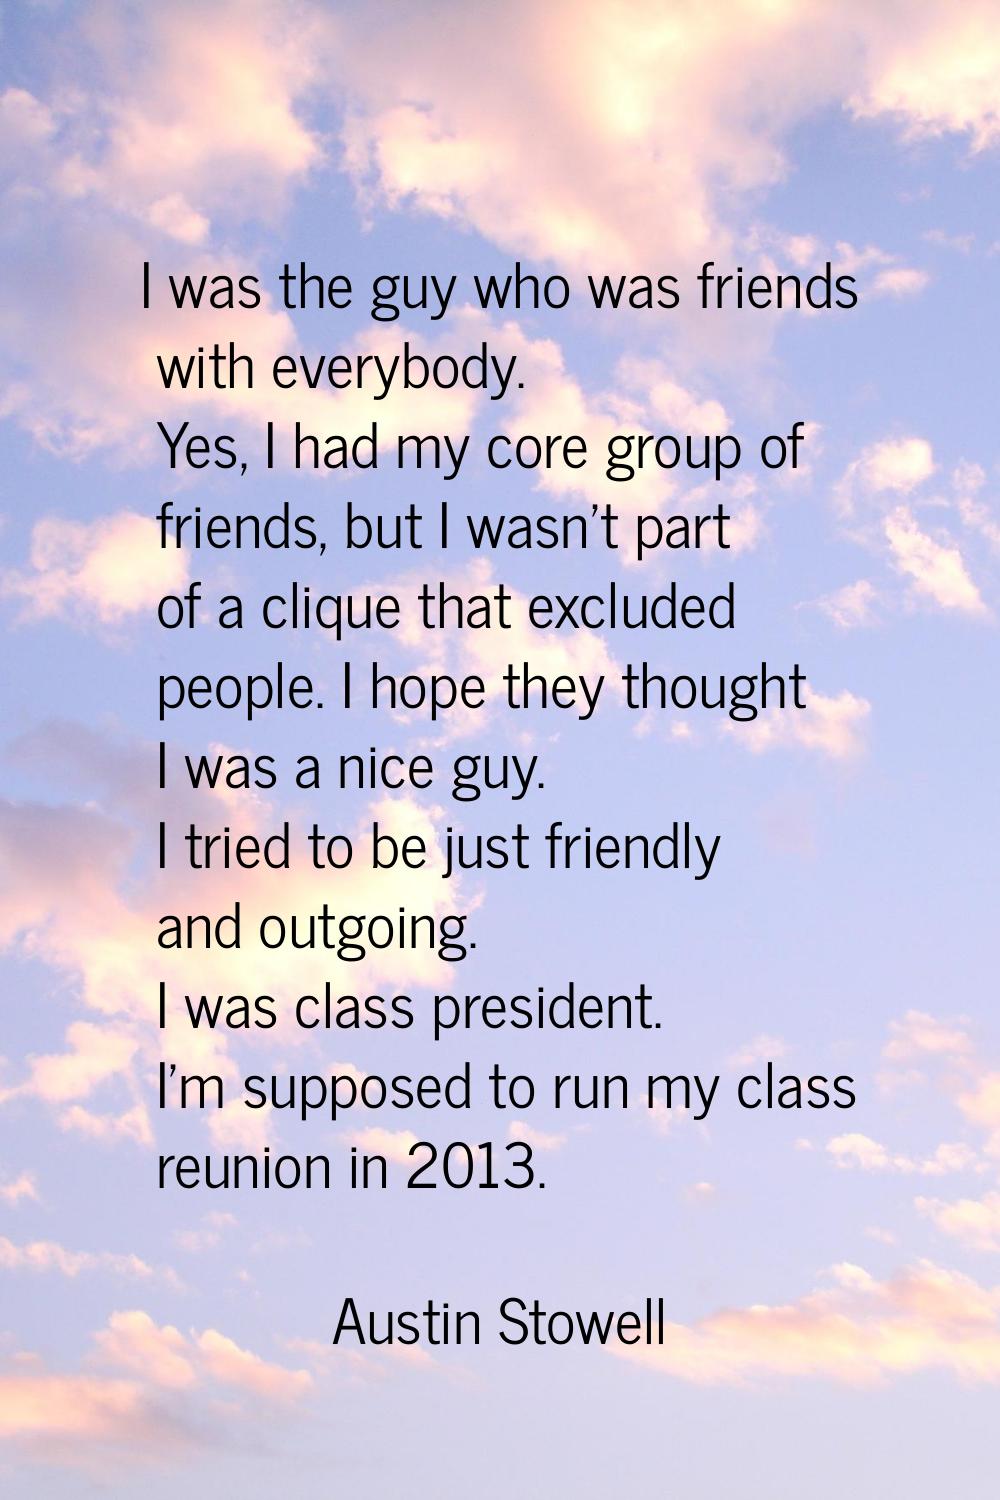 I was the guy who was friends with everybody. Yes, I had my core group of friends, but I wasn't par